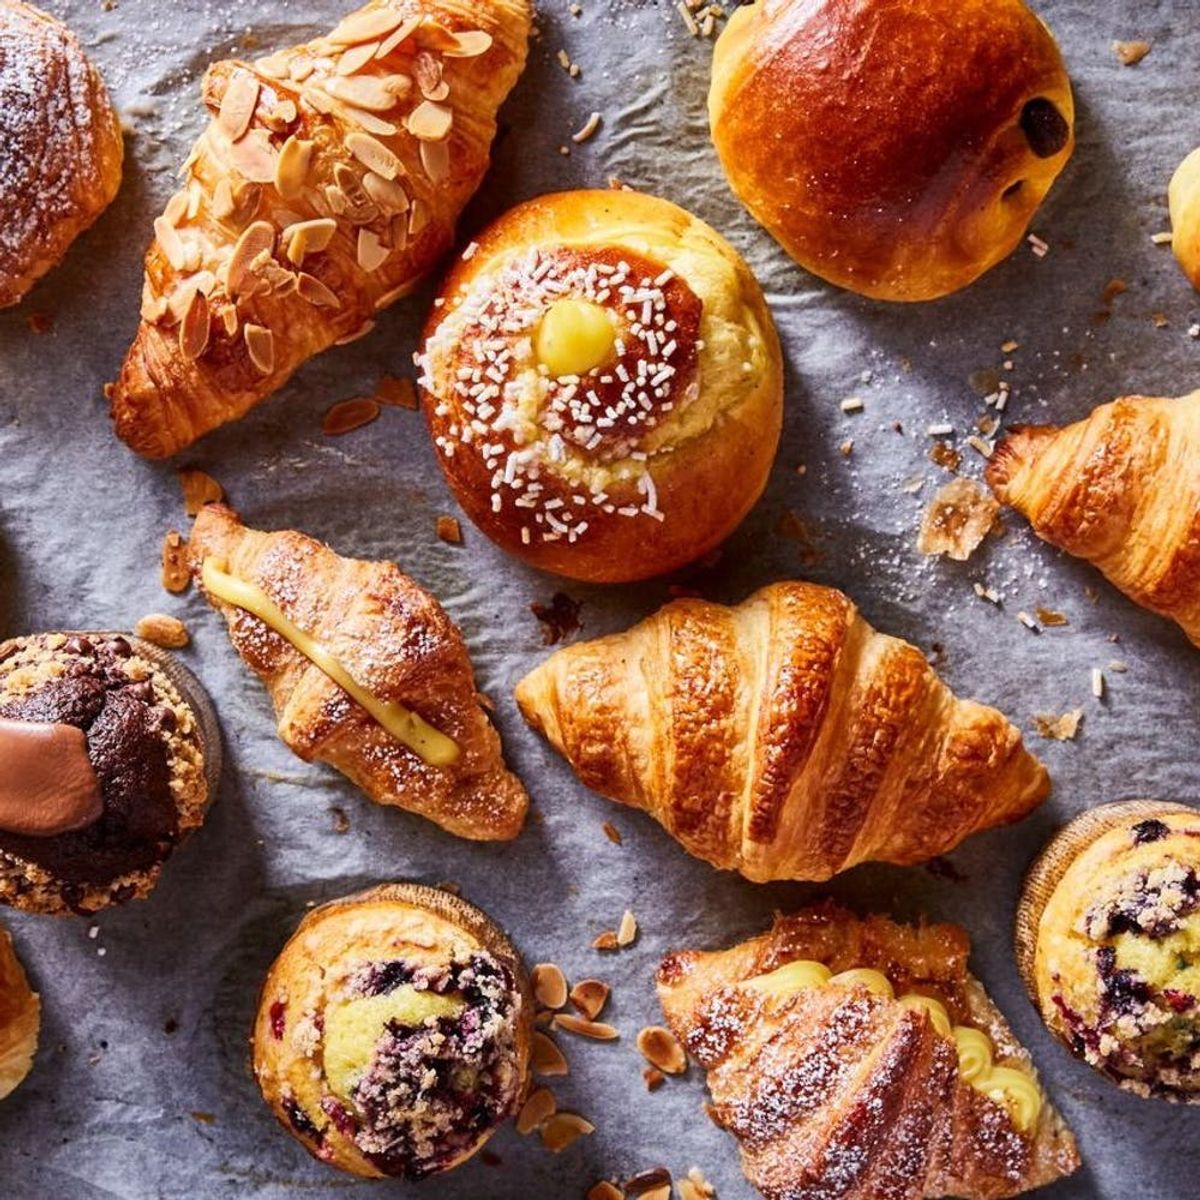 Starbucks Is Going to Be Stocking Some Very Pretty Italian Pastries Soon